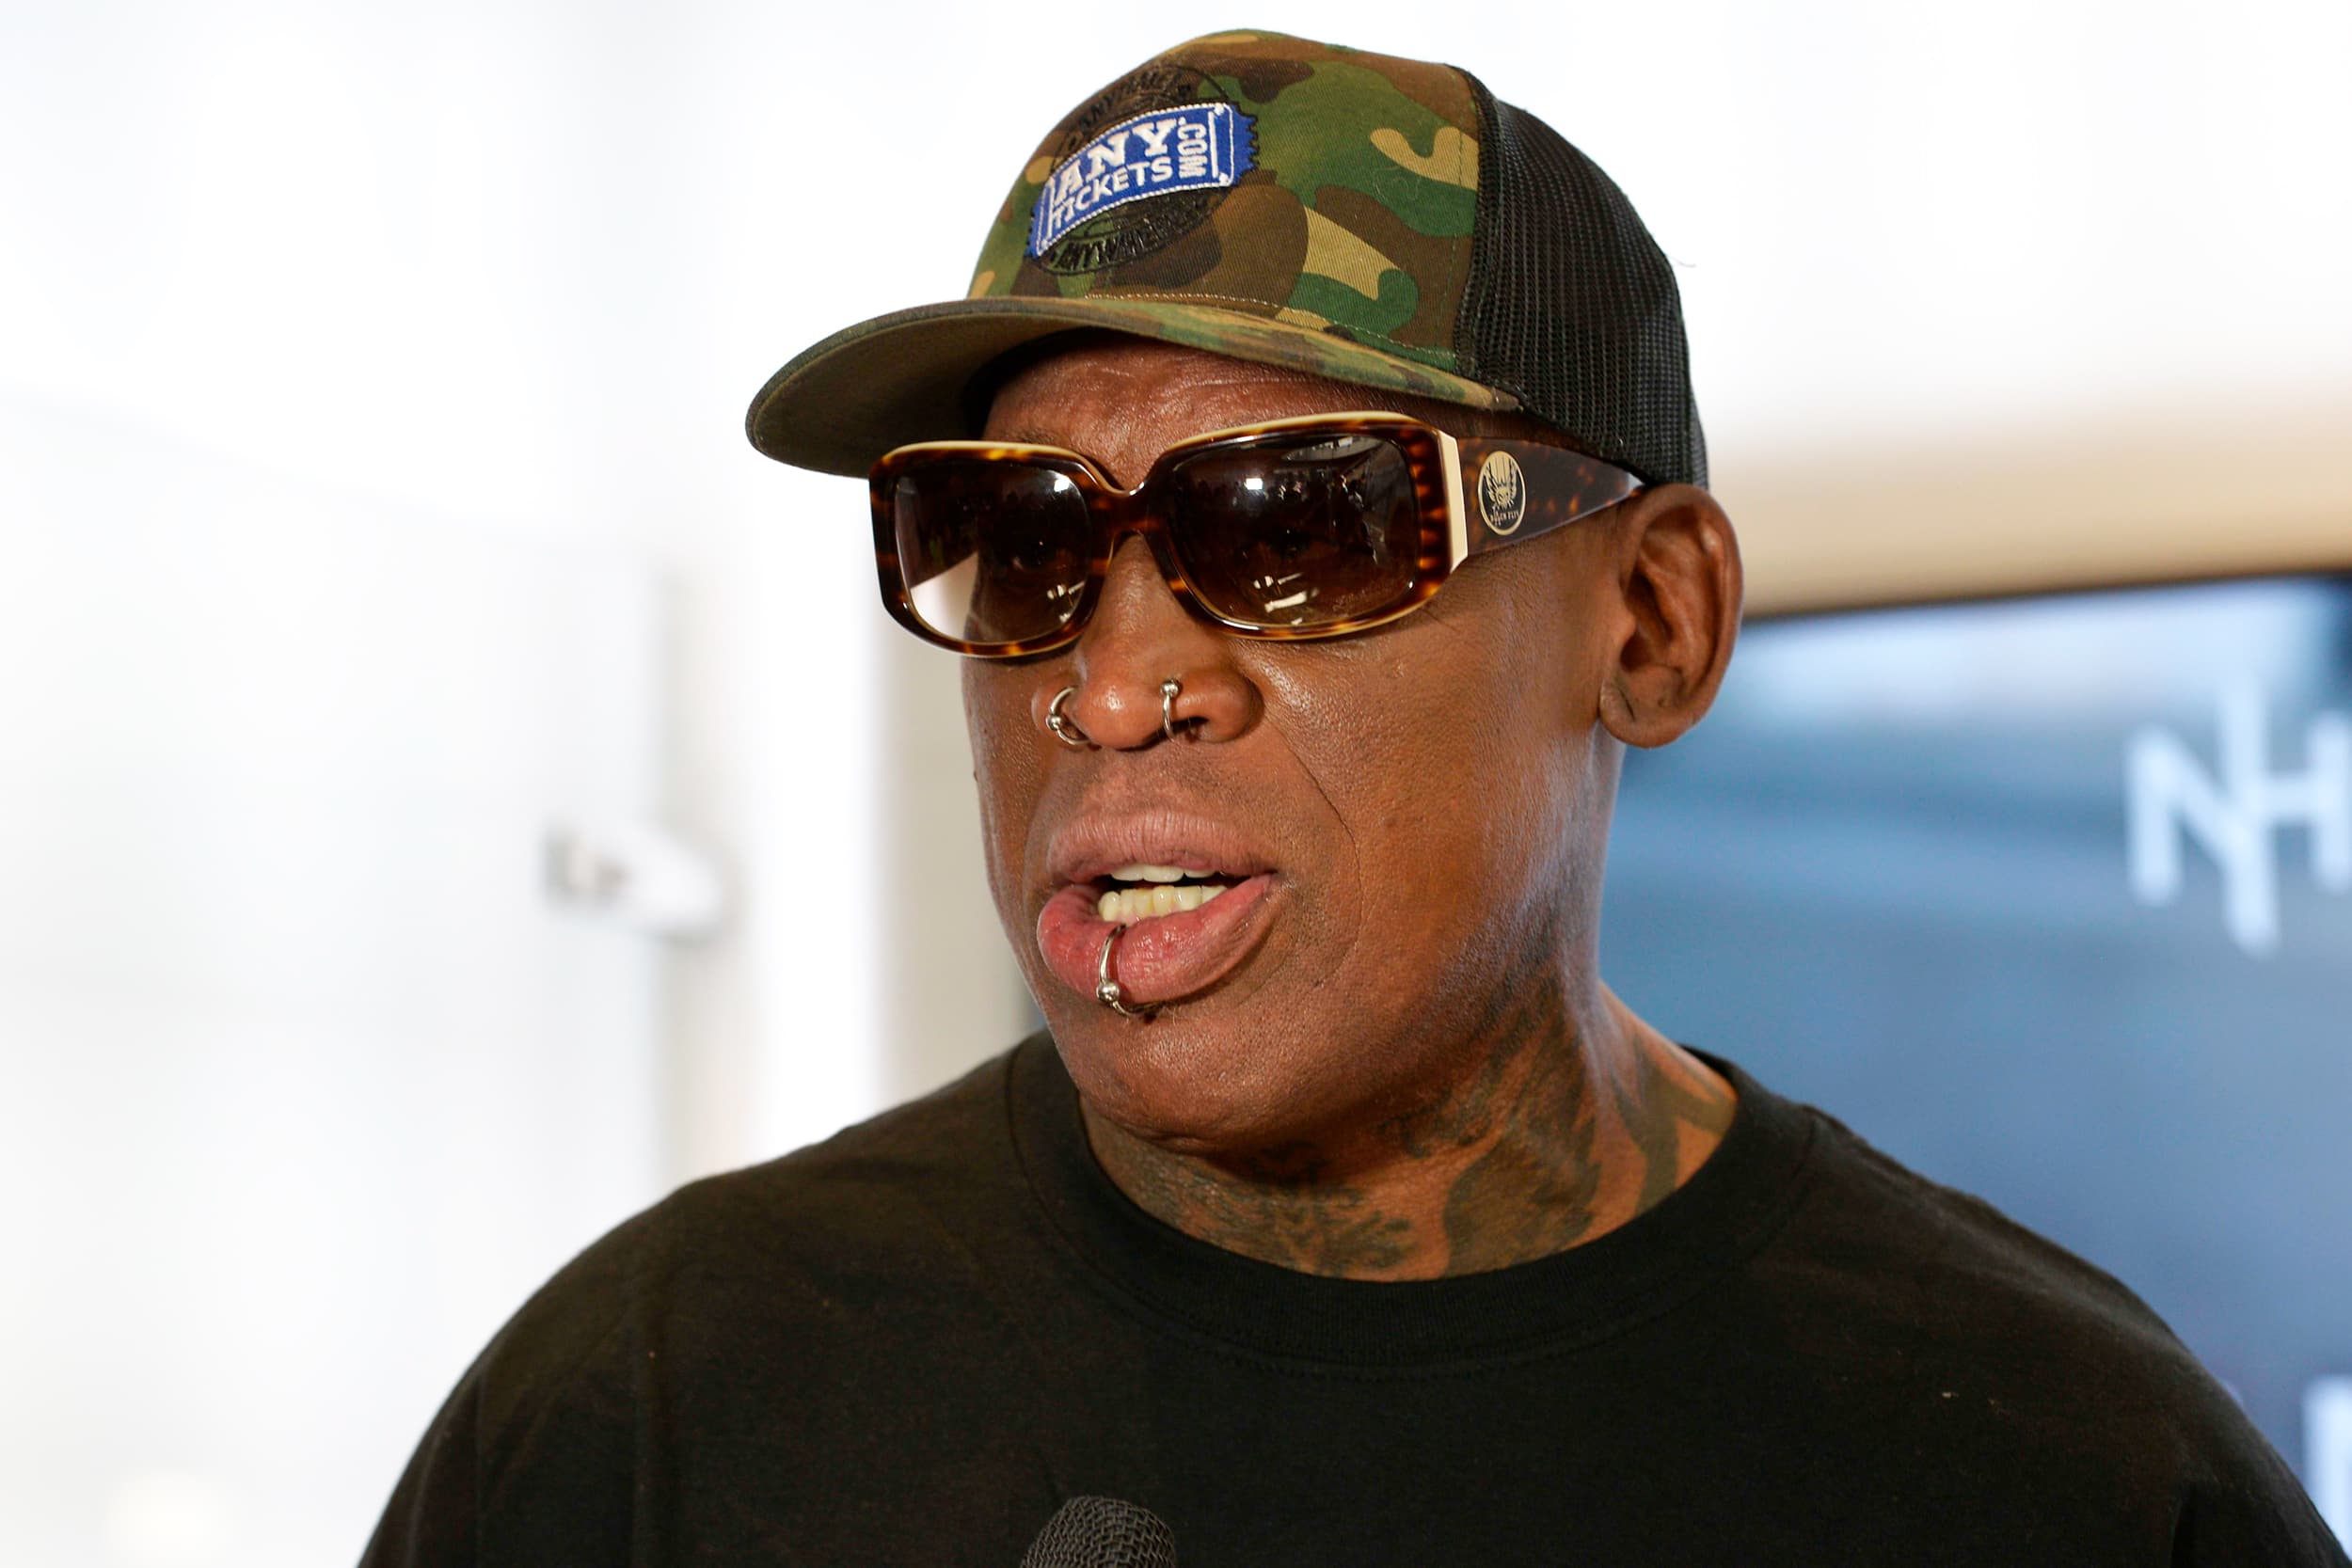 Dennis Rodman Will Go To Russia To Help Brittney Griner - The WNBA Player Was Sentenced Nine Years In Prison